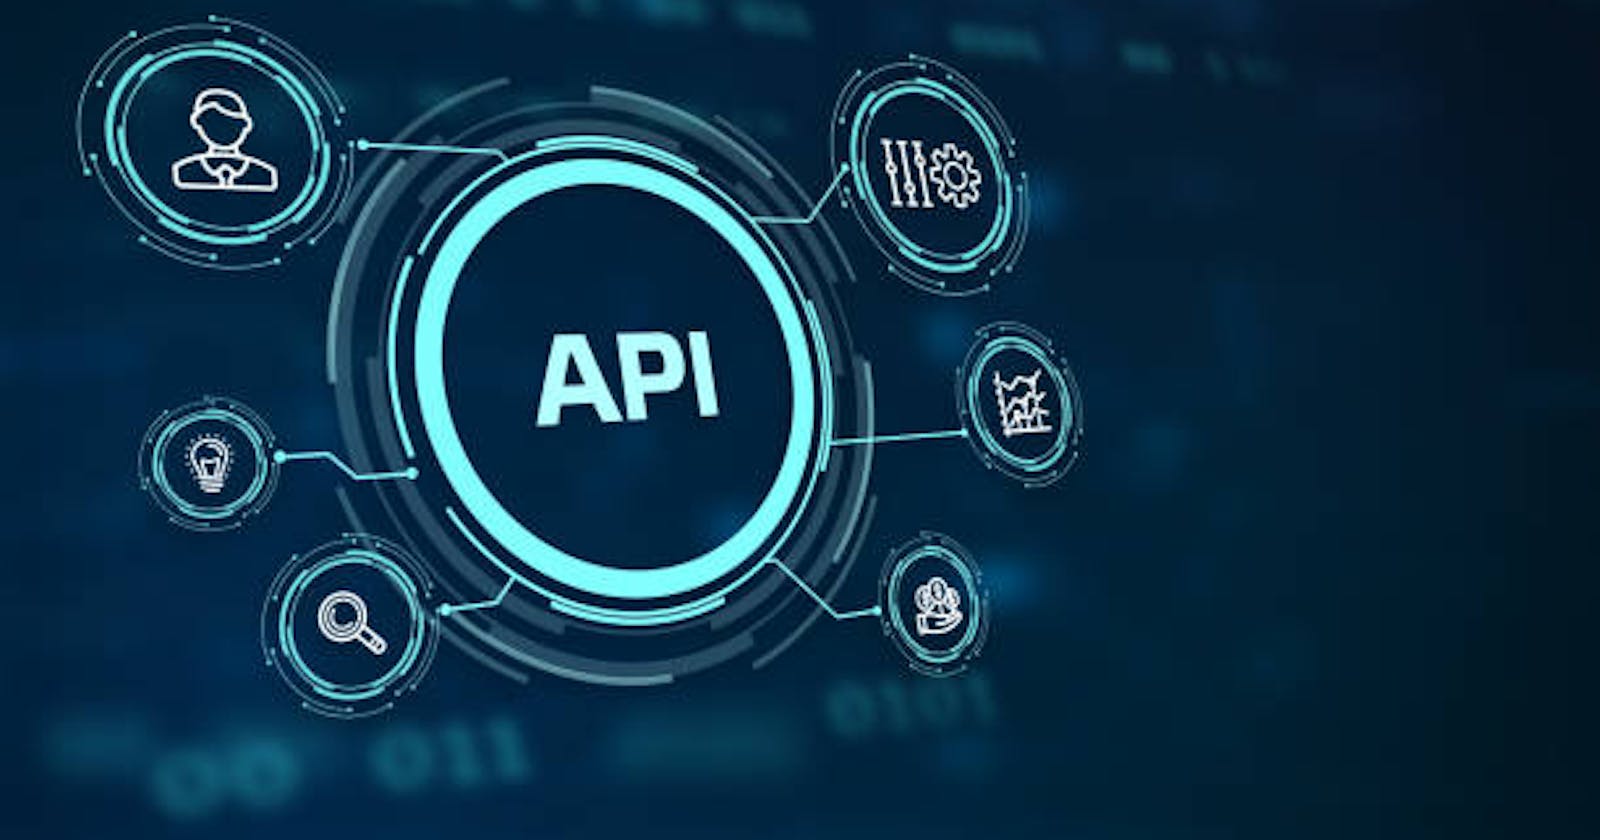 Demystifying APIs: A Beginner's Guide to Understanding What an API Is